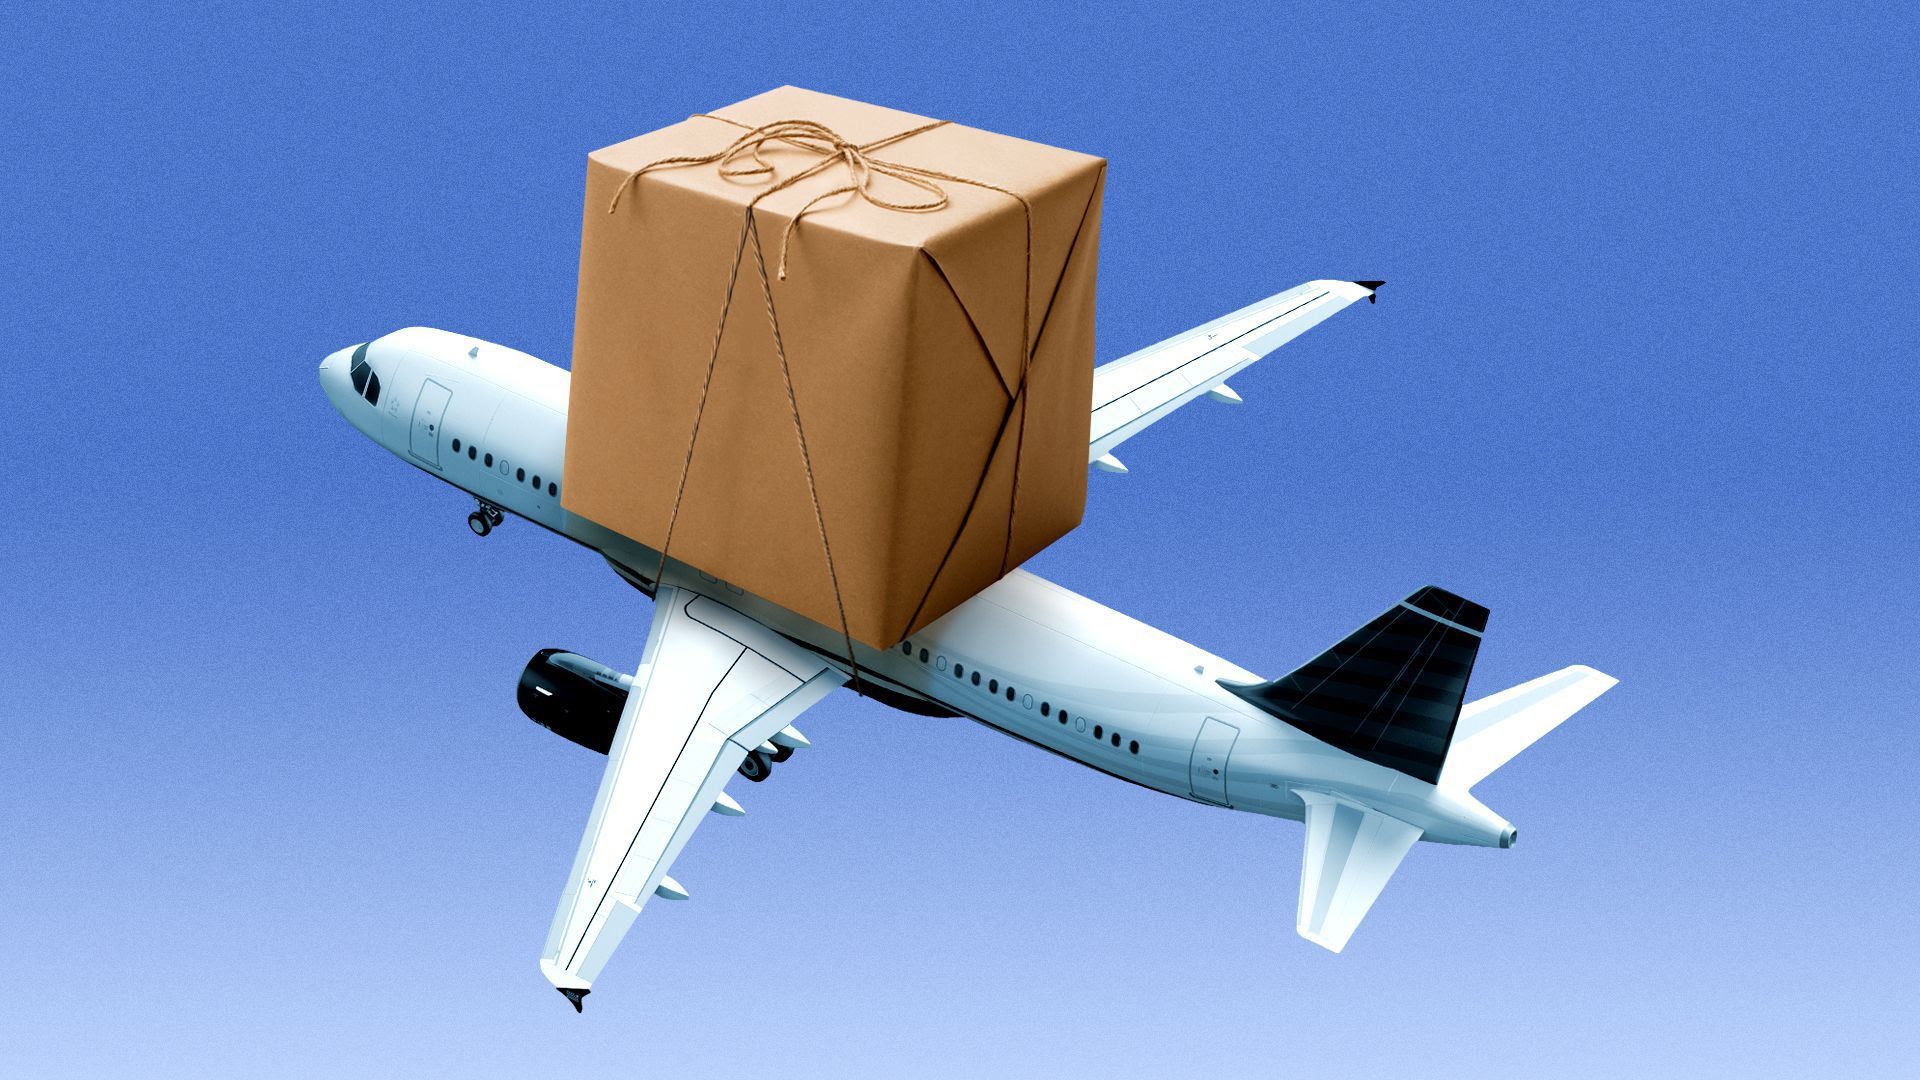 An airplane with a package strapped on top